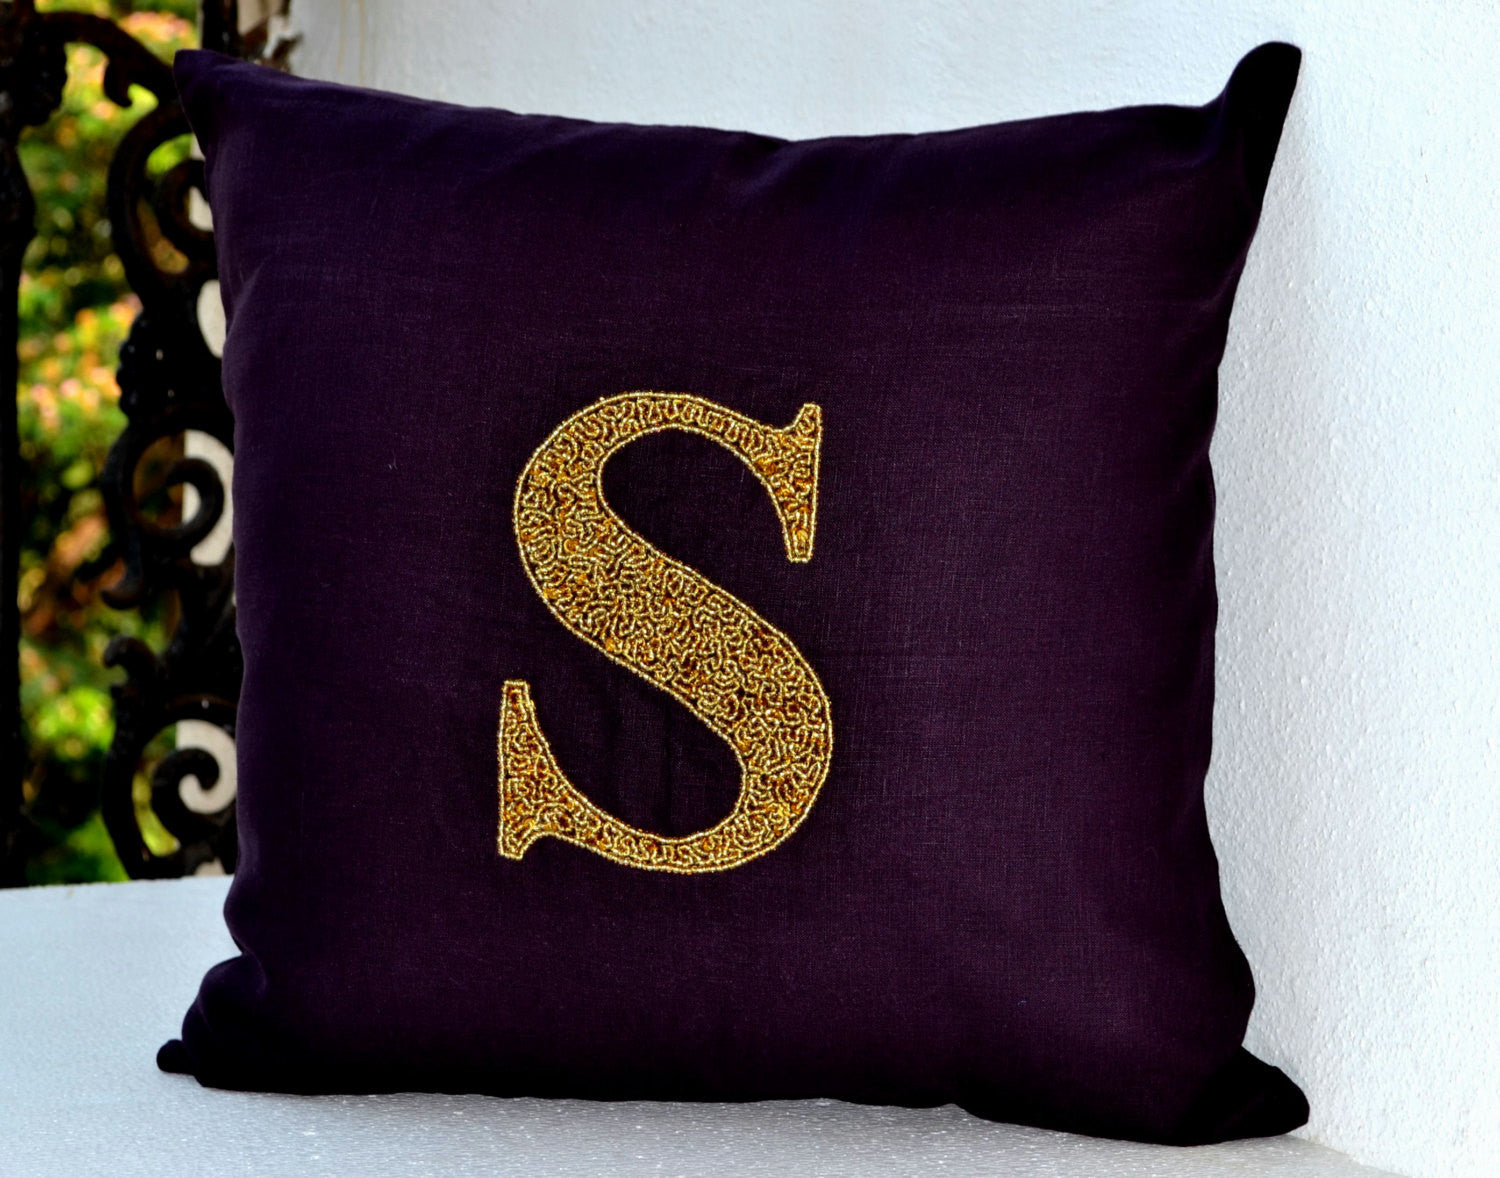 Handmade purple linen pillow with monogram gold sequin and beads